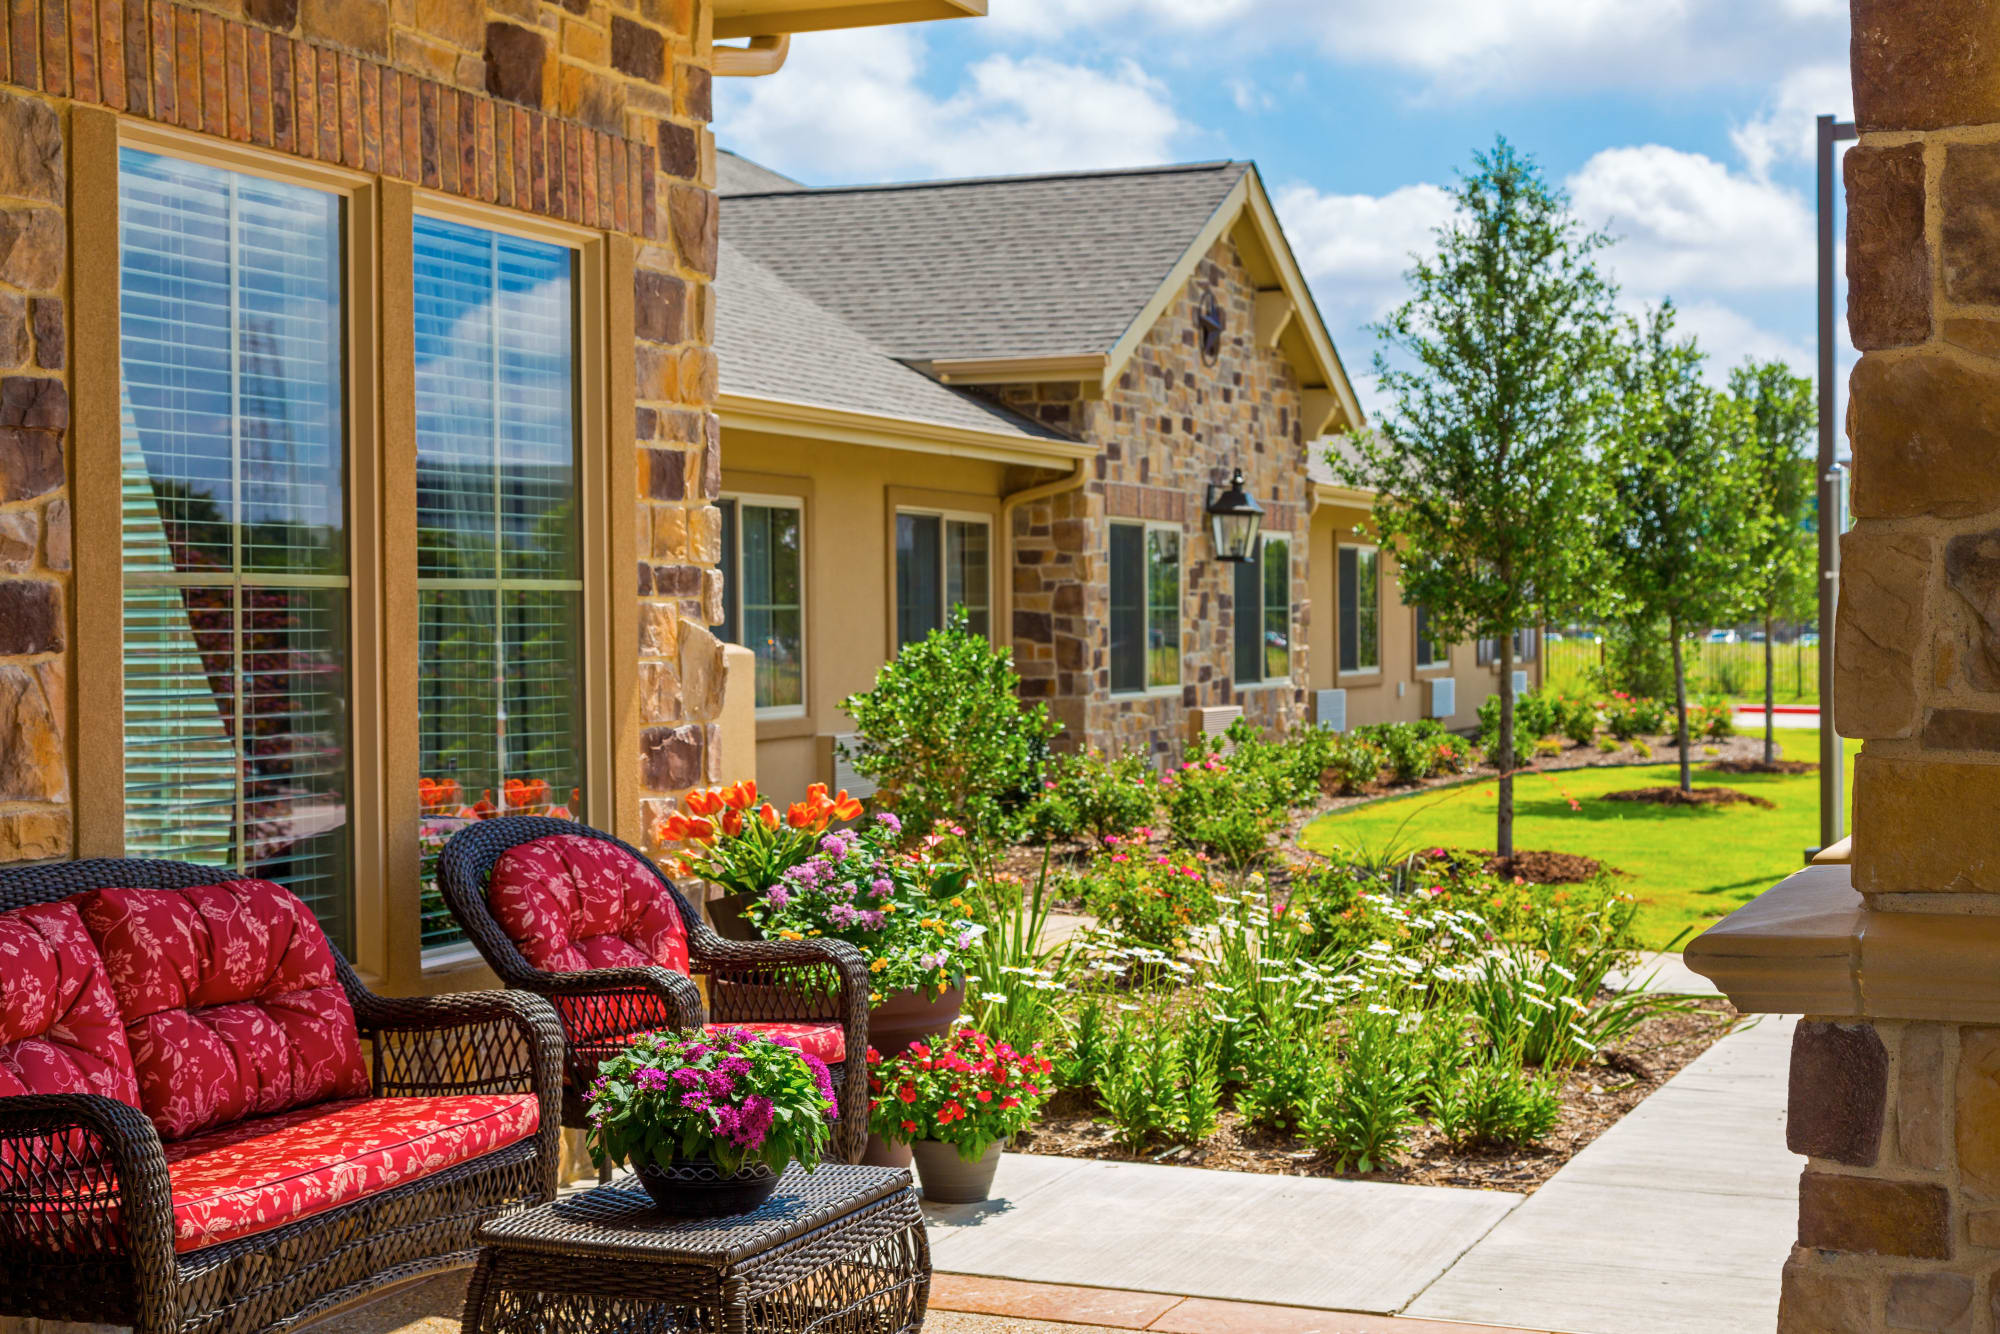 Apartment patio with wicker chairs at Saddlebrook Oxford Memory Care in Frisco, Texas